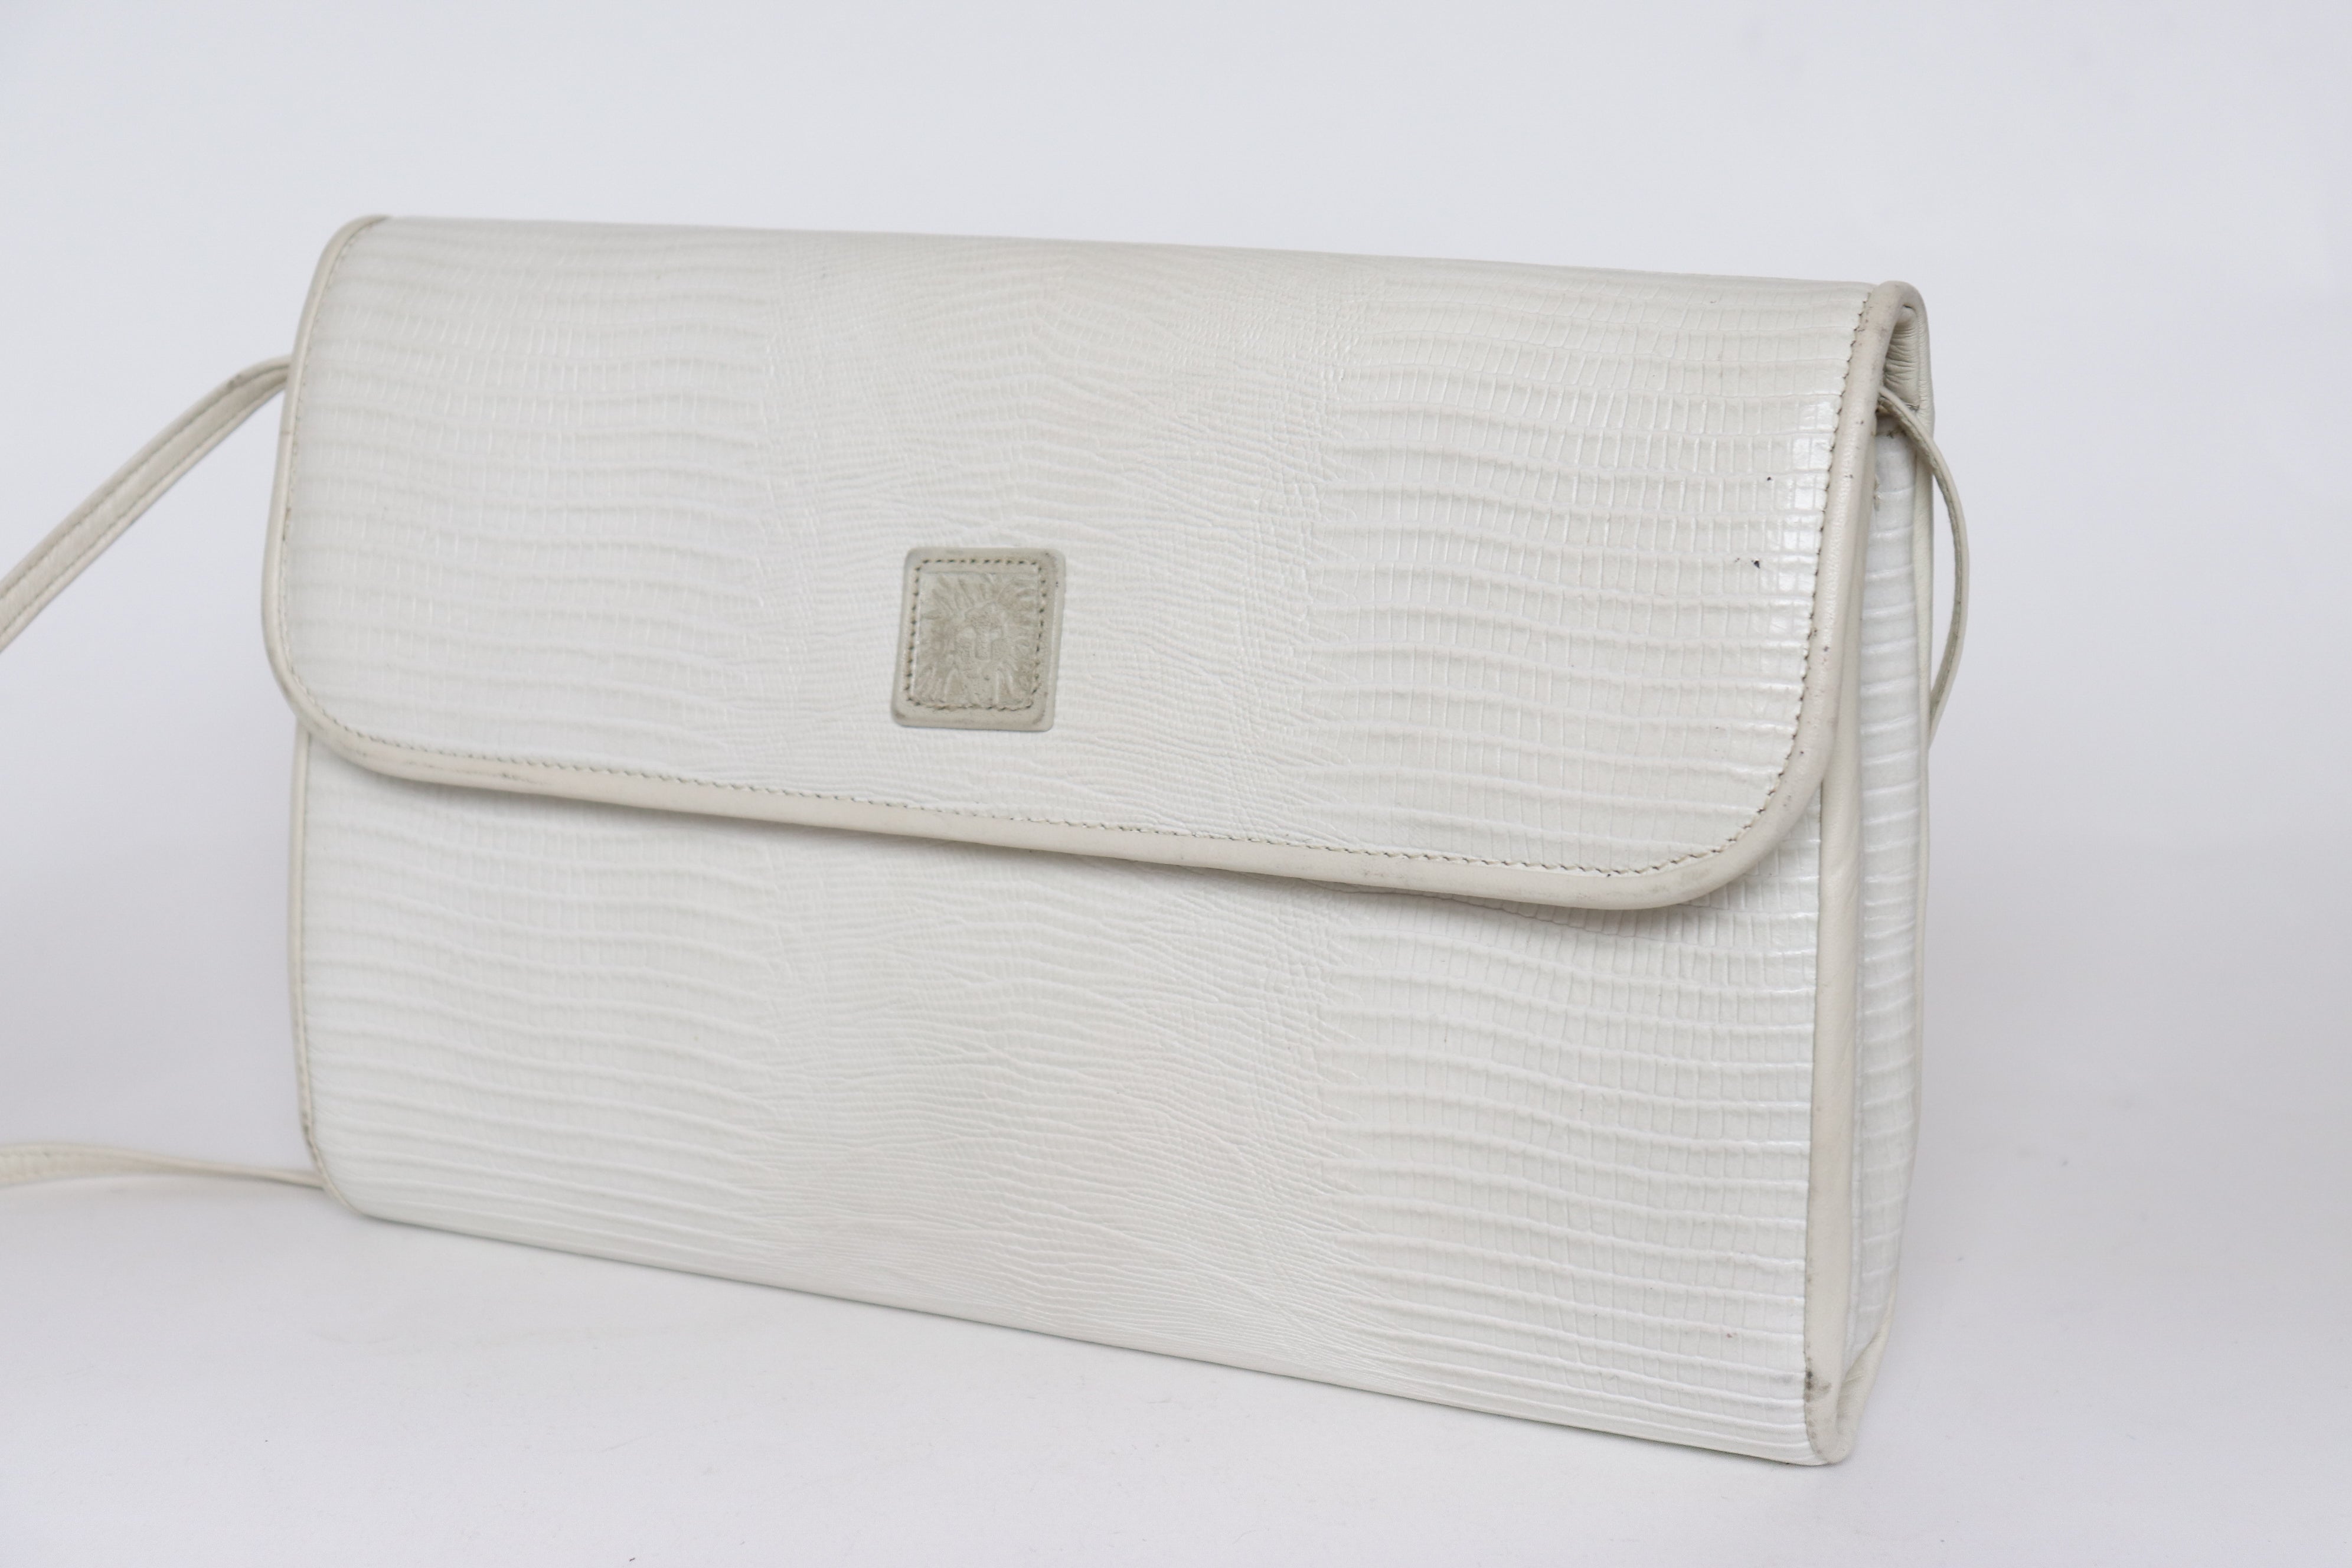 Anne Klein Vintage Crossbody Leather Bag - Ivory White - 1980s - Small